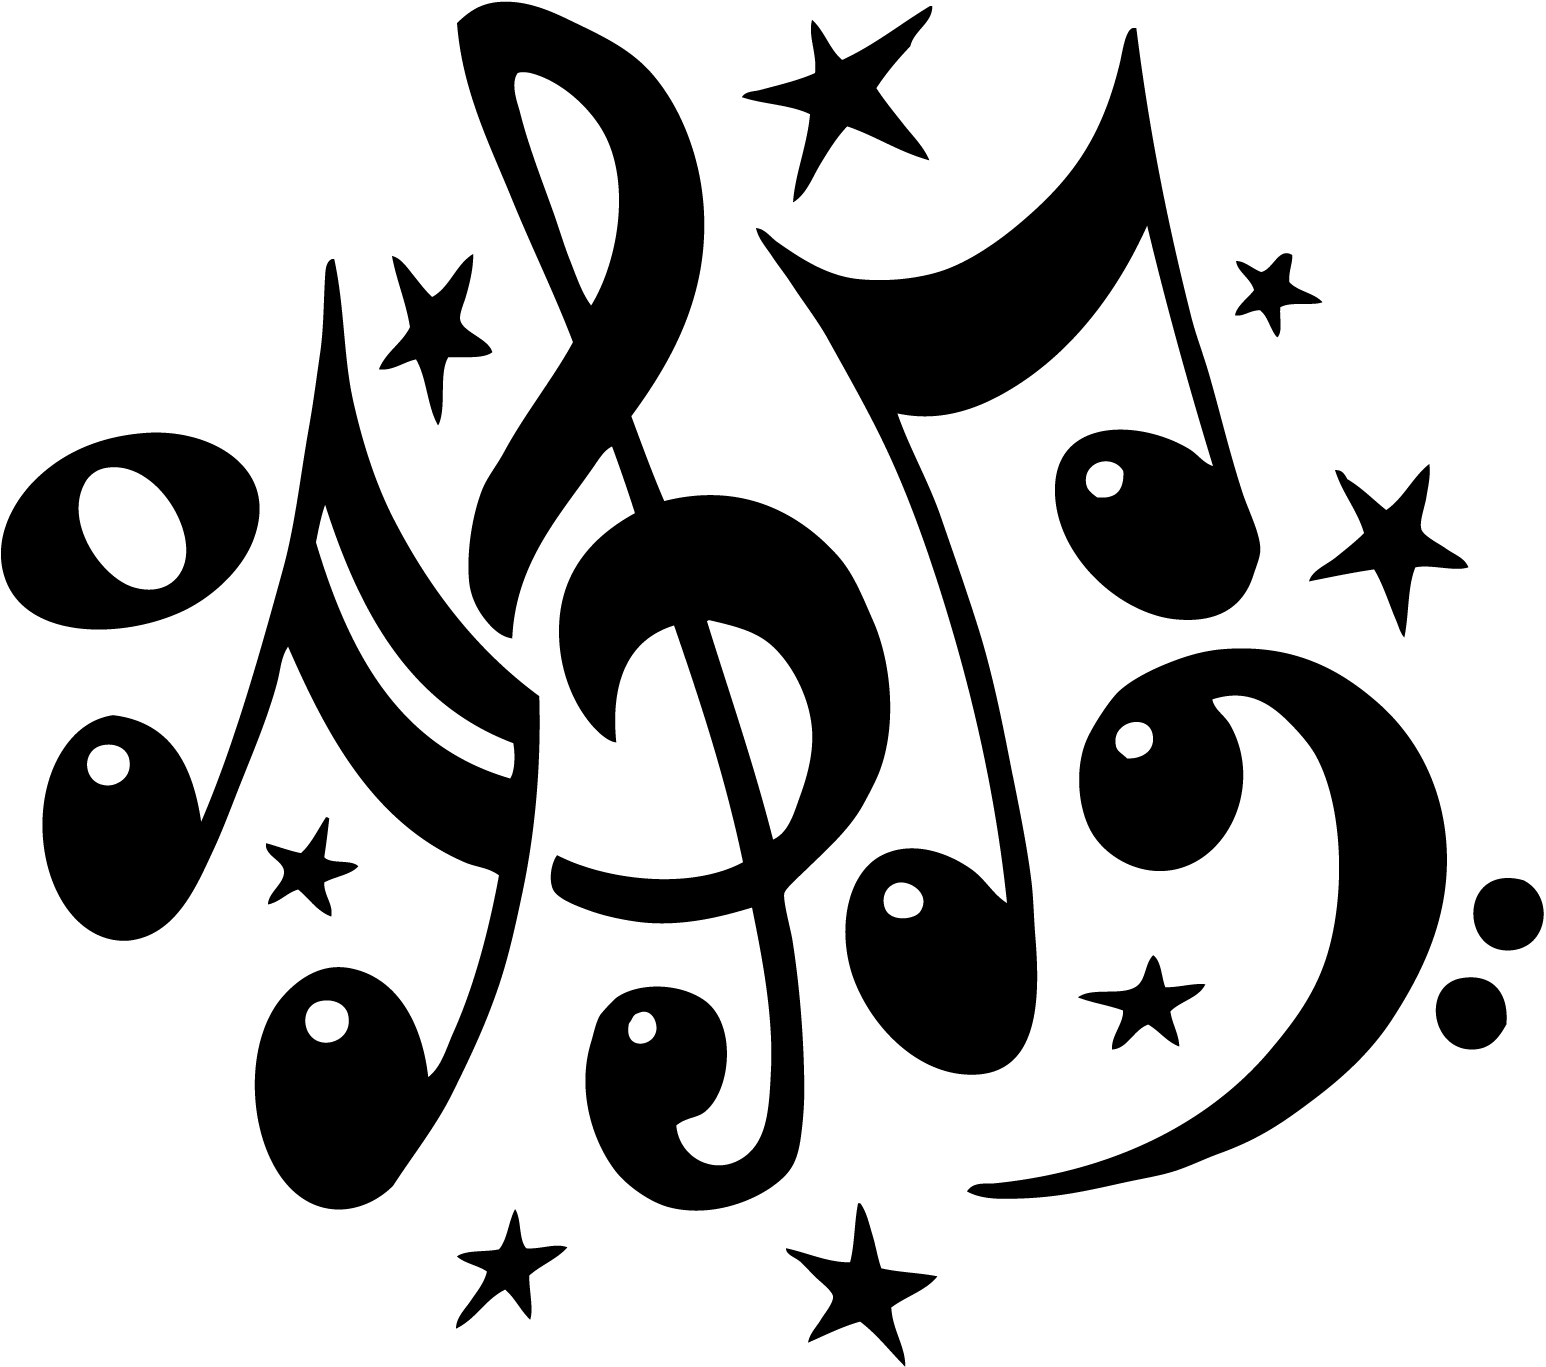 Music Notes clipart #4, Download drawings